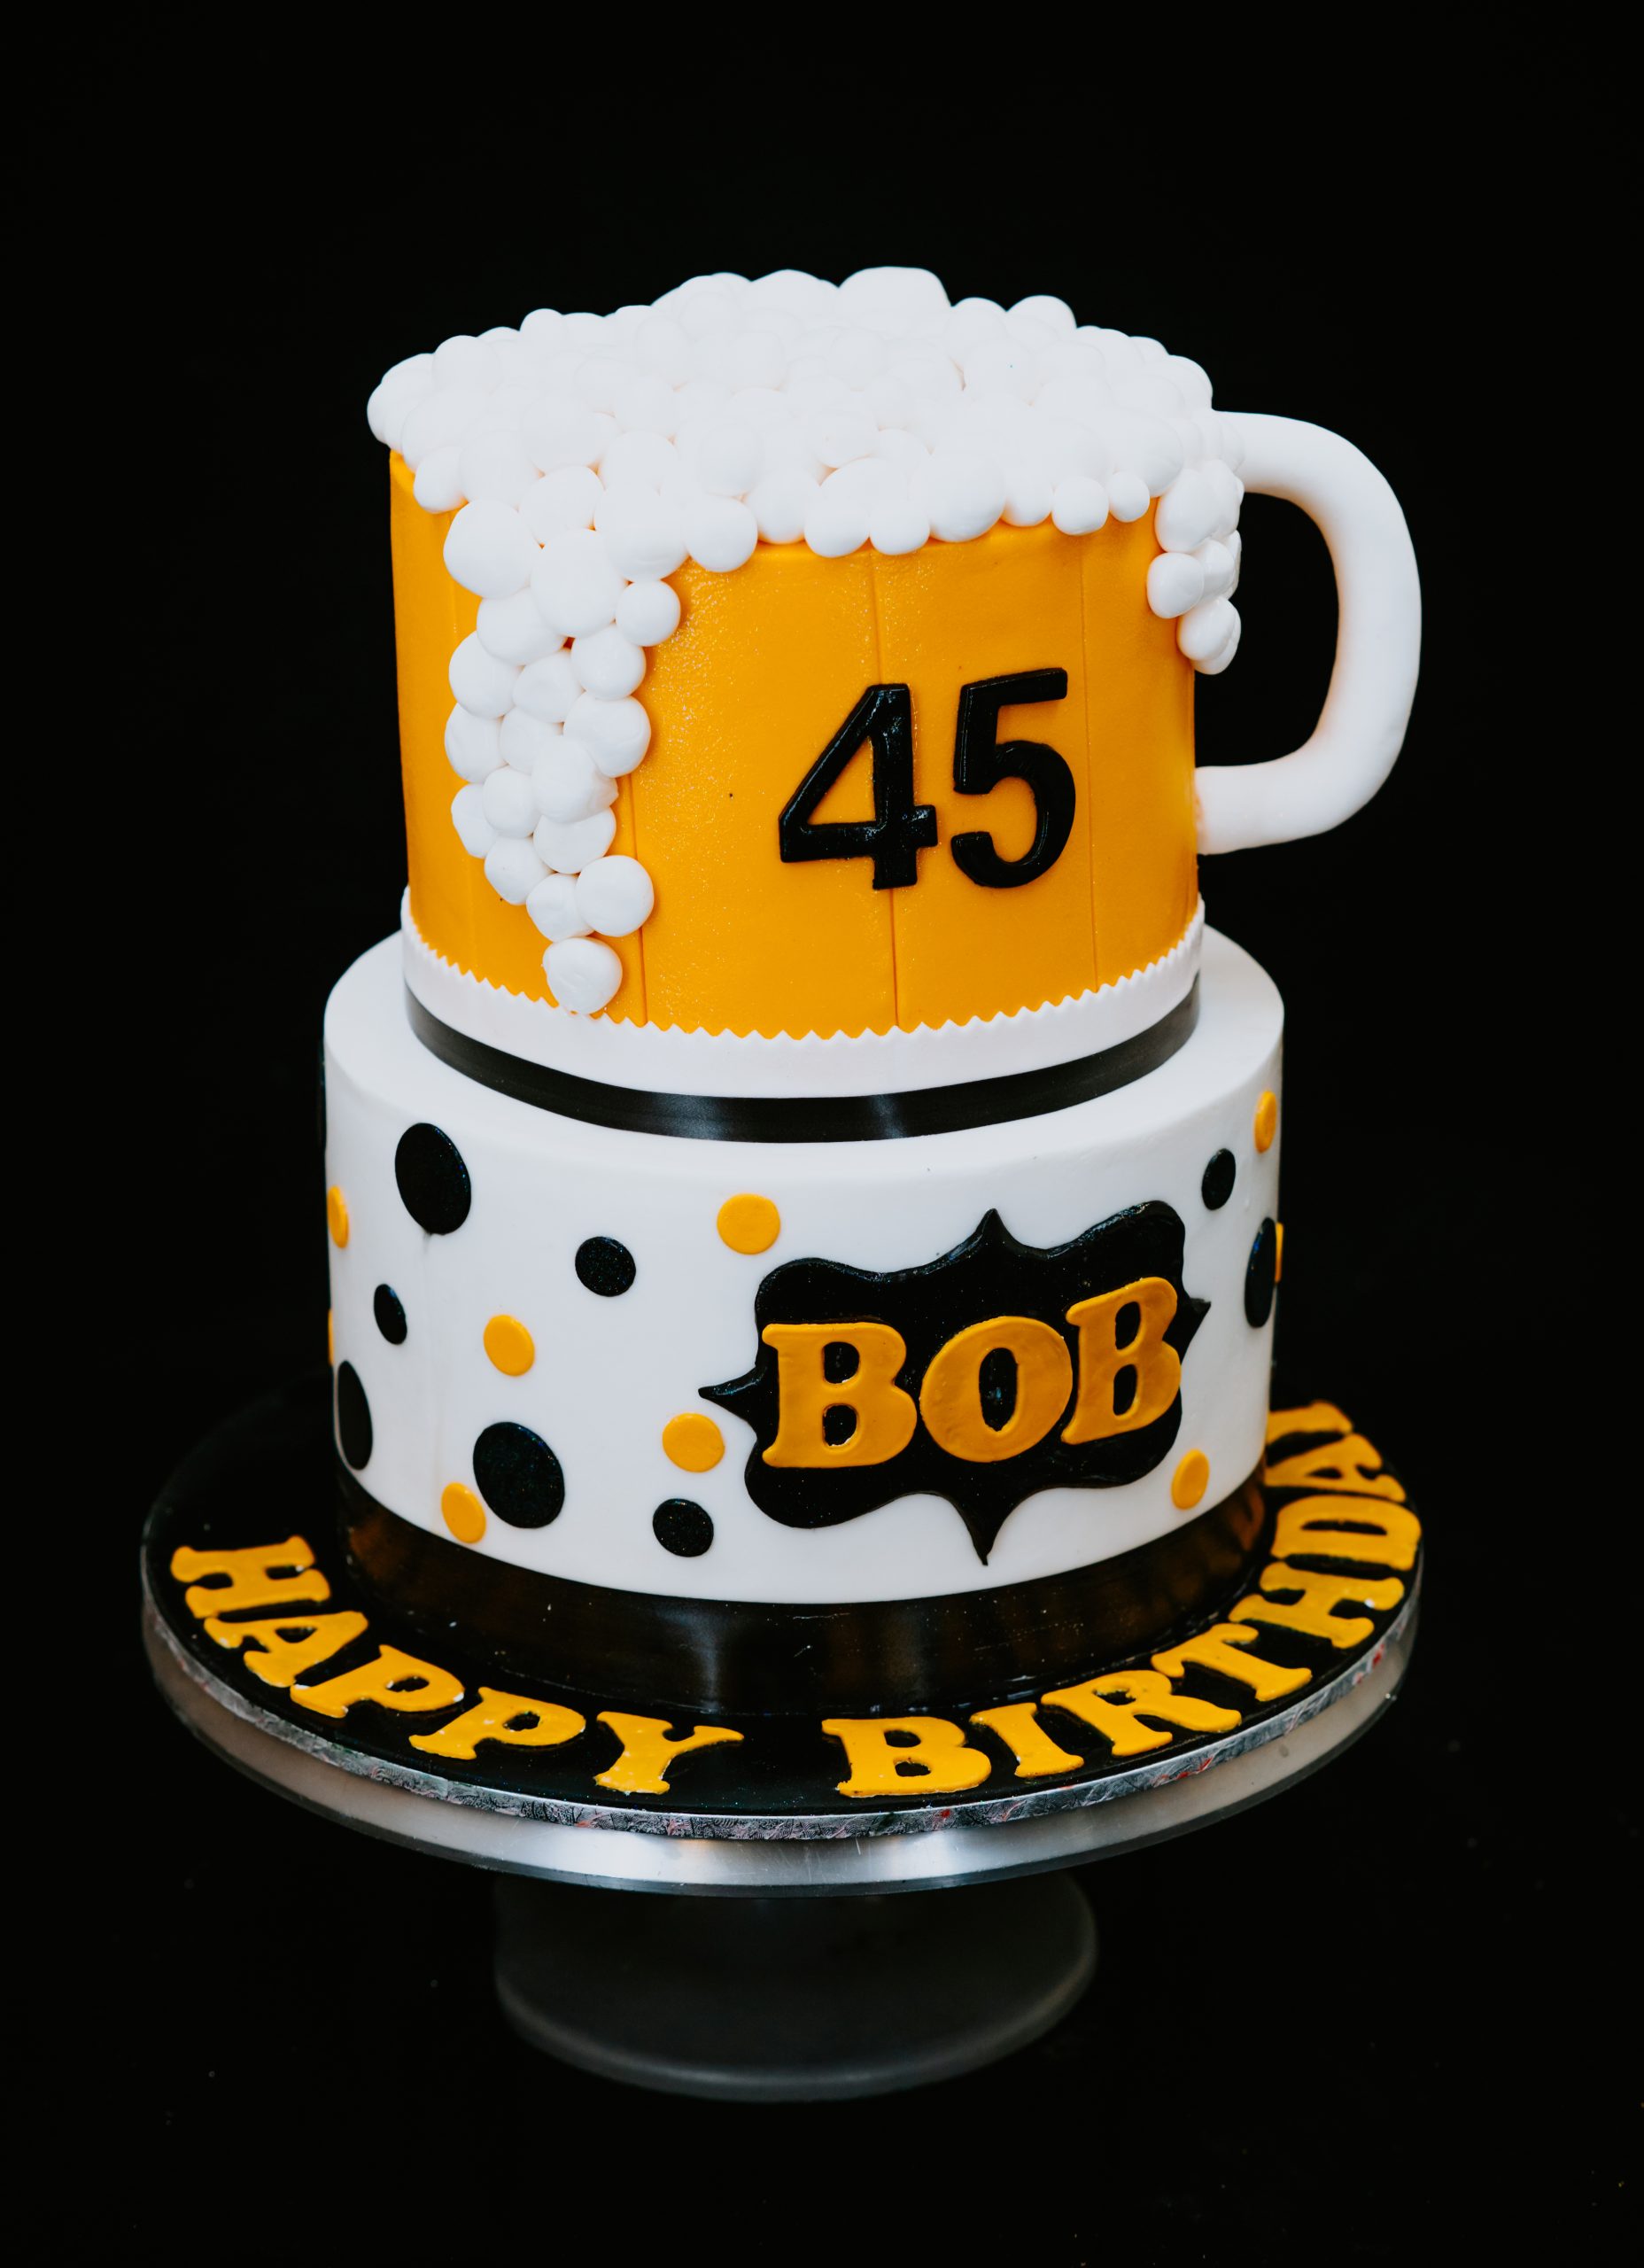 Budweiser 6 Pack of Beer Bottles Edible Cake Topper Image ABPID56196 – A  Birthday Place